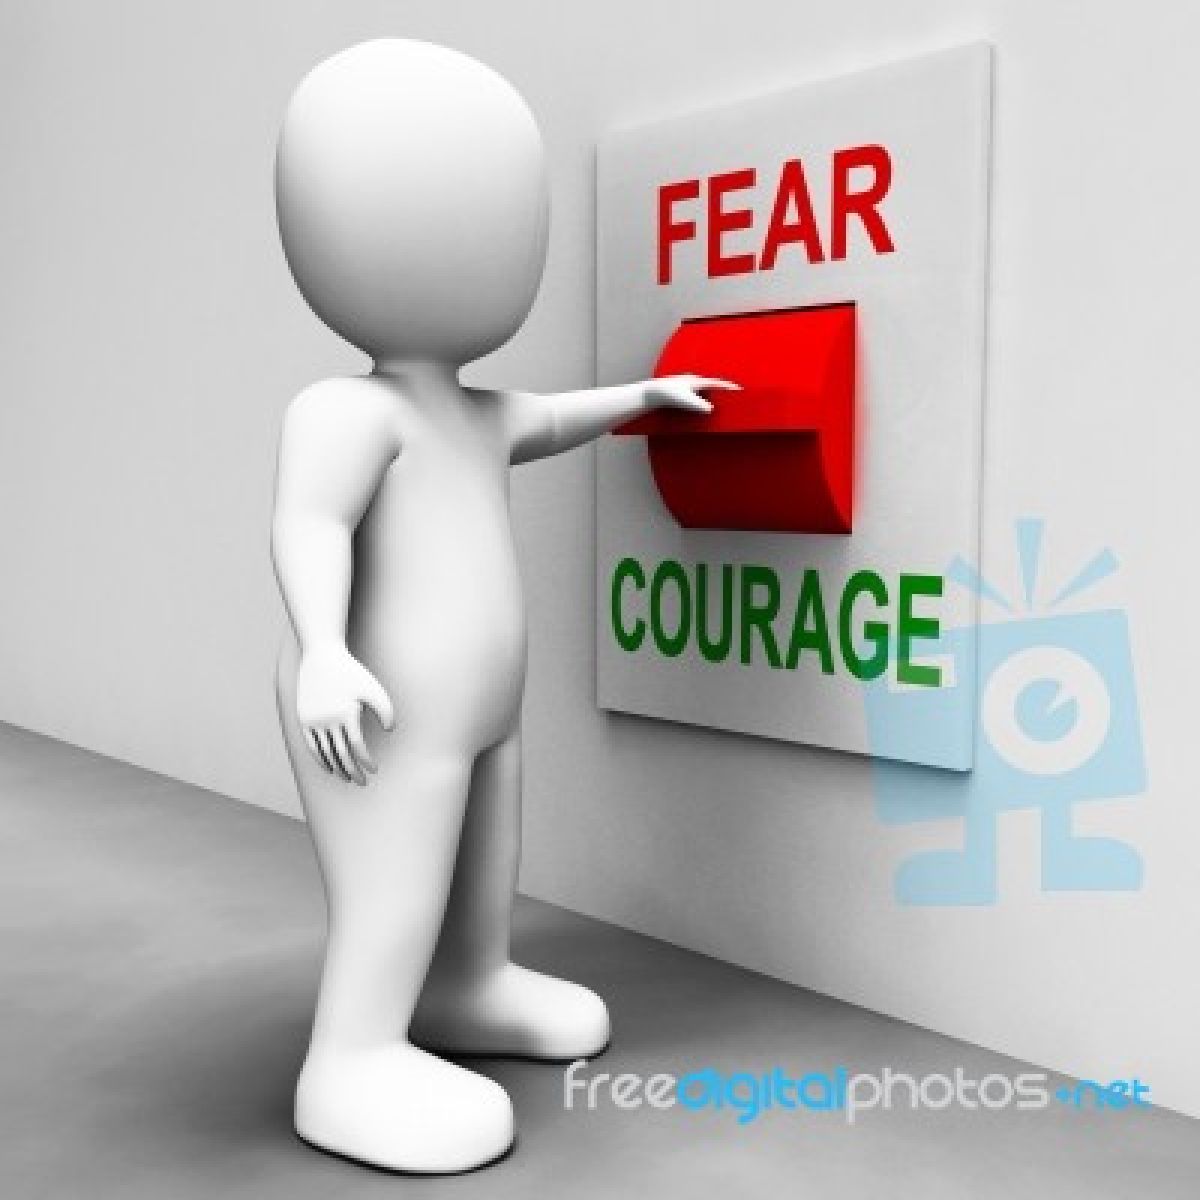 Courage is a complex and multifaceted trait, and there are various